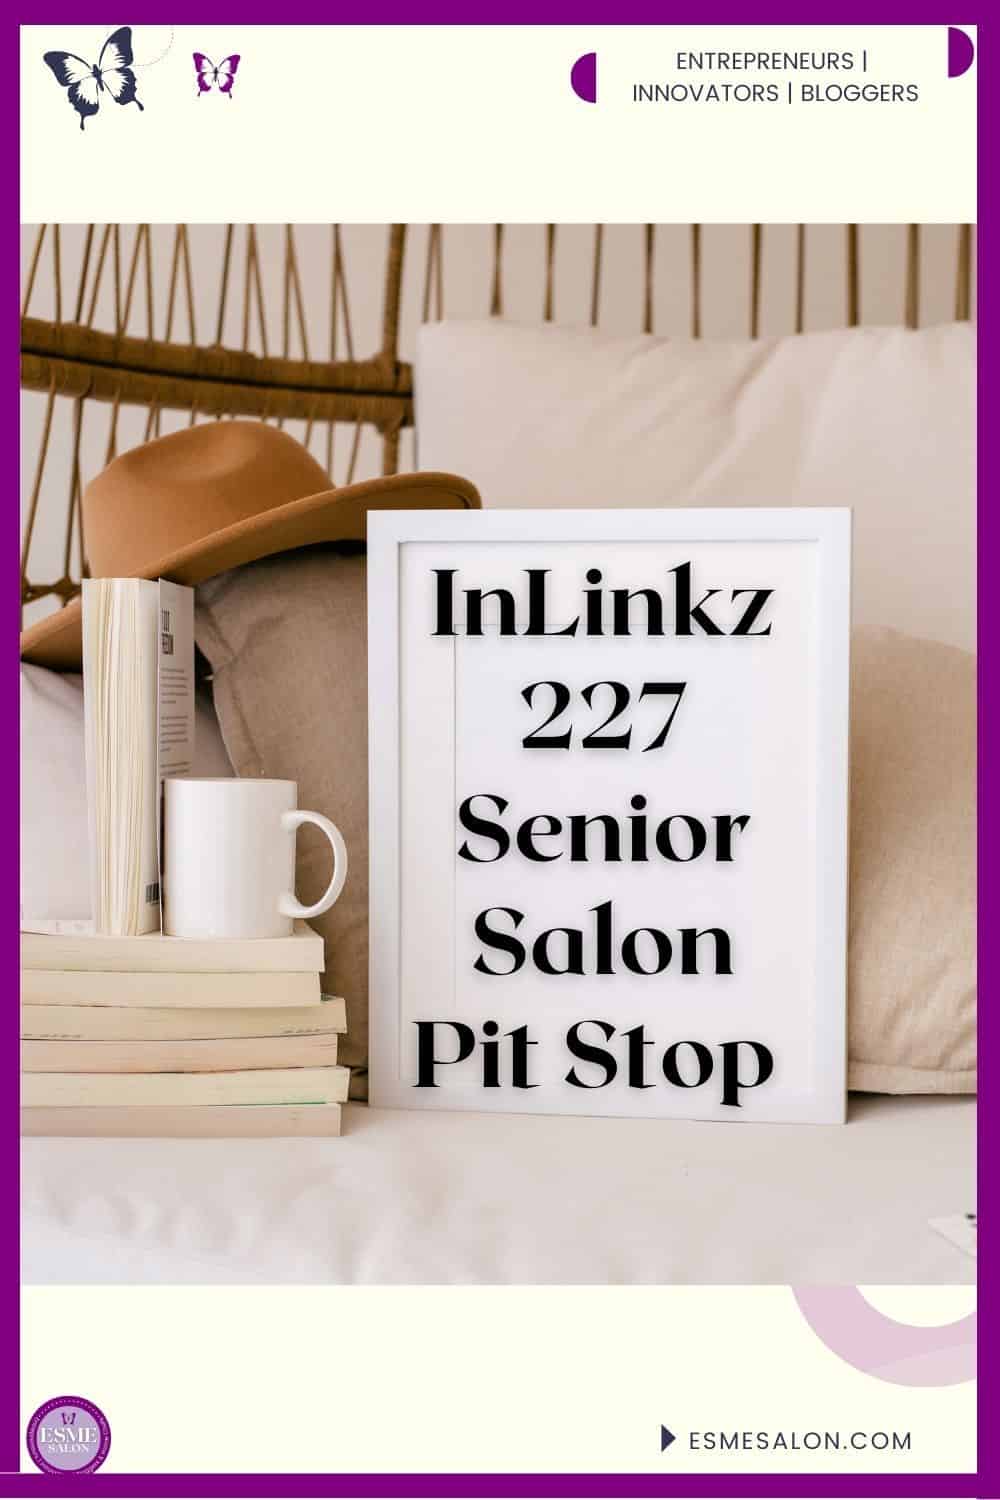 an image of a brown hat next to books and a mug and a sign for InLinkz 227 Senior Salon Pit Stop